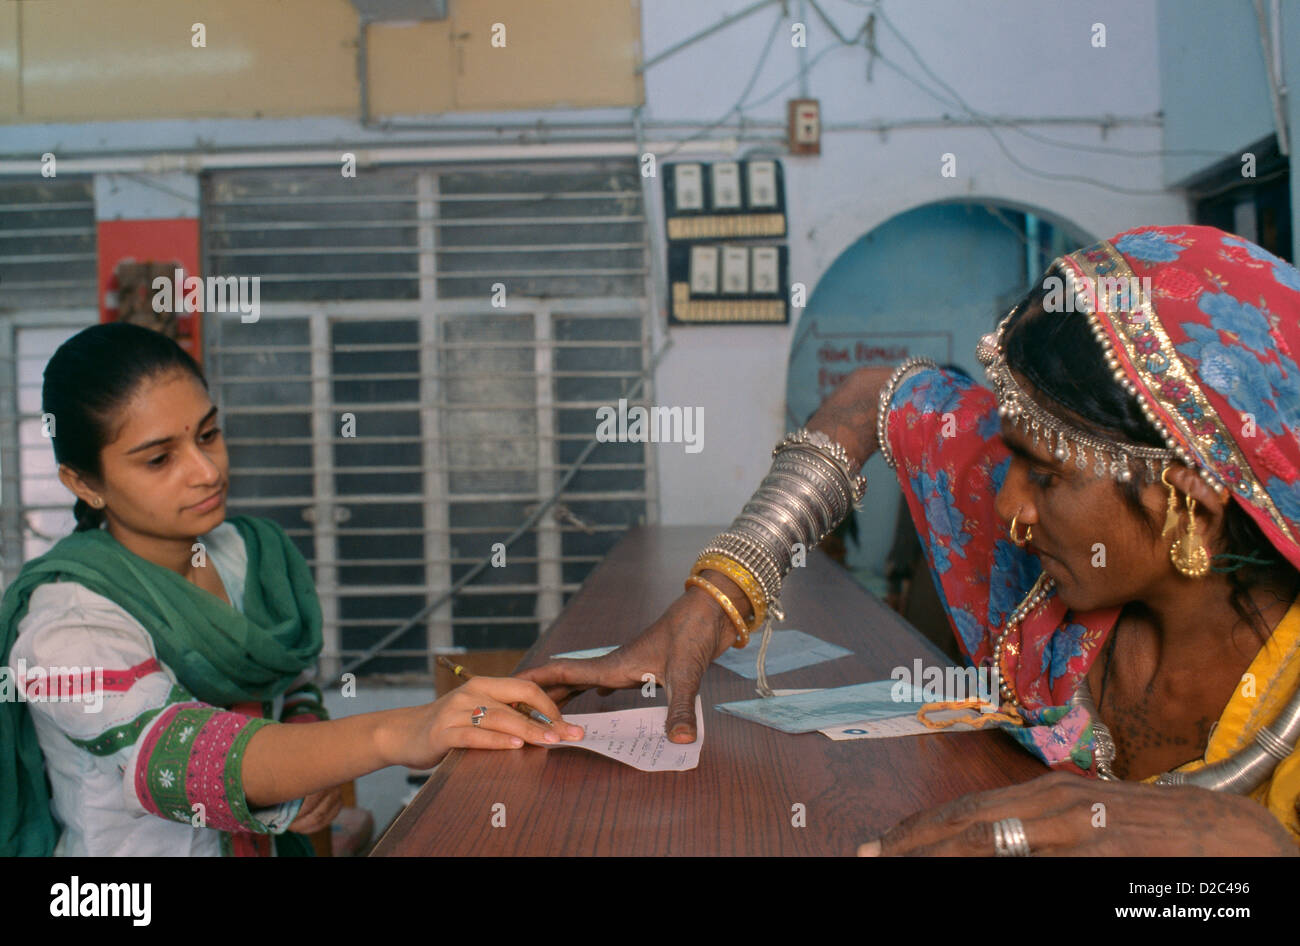 Rural Woman Putting A Thumb Impression In A Bank To Open Her Bank Account At Bank, Ahmedabad.India Stock Photo